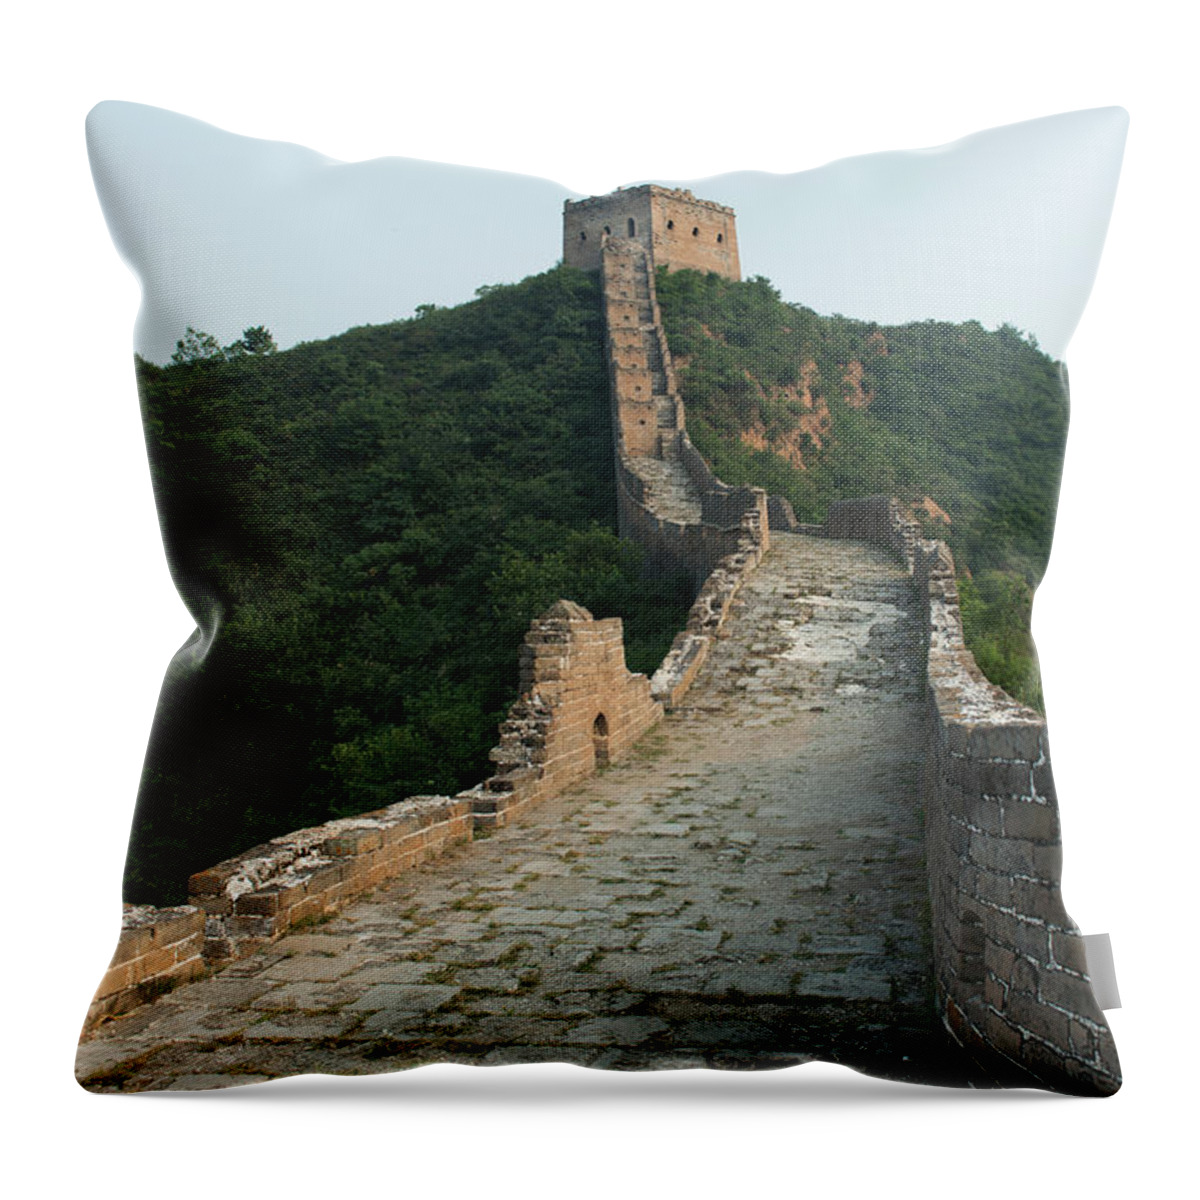 Chinese Culture Throw Pillow featuring the photograph The Great Wall Of China #2 by Keith Levit / Design Pics